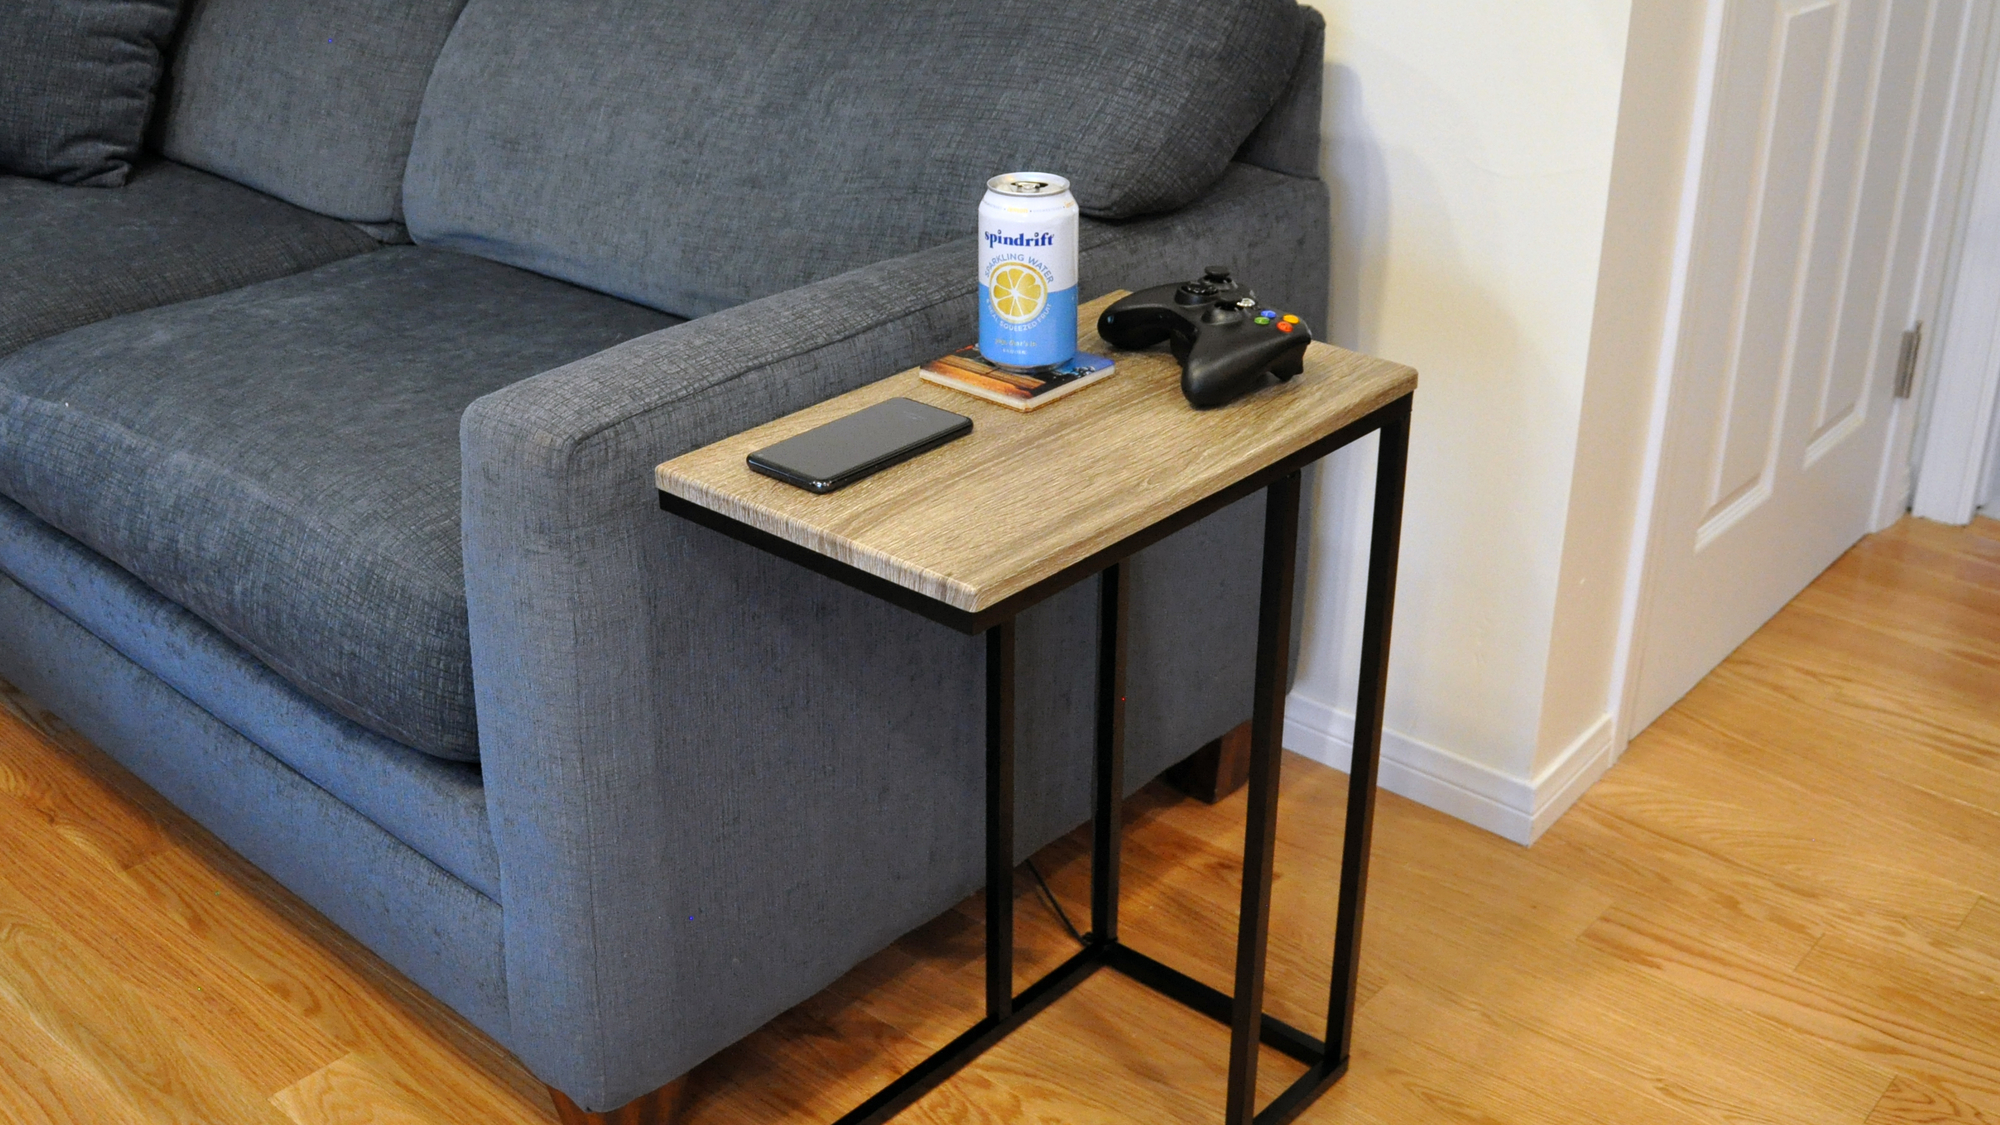 a finished end table with built-in wireless charging capabilities